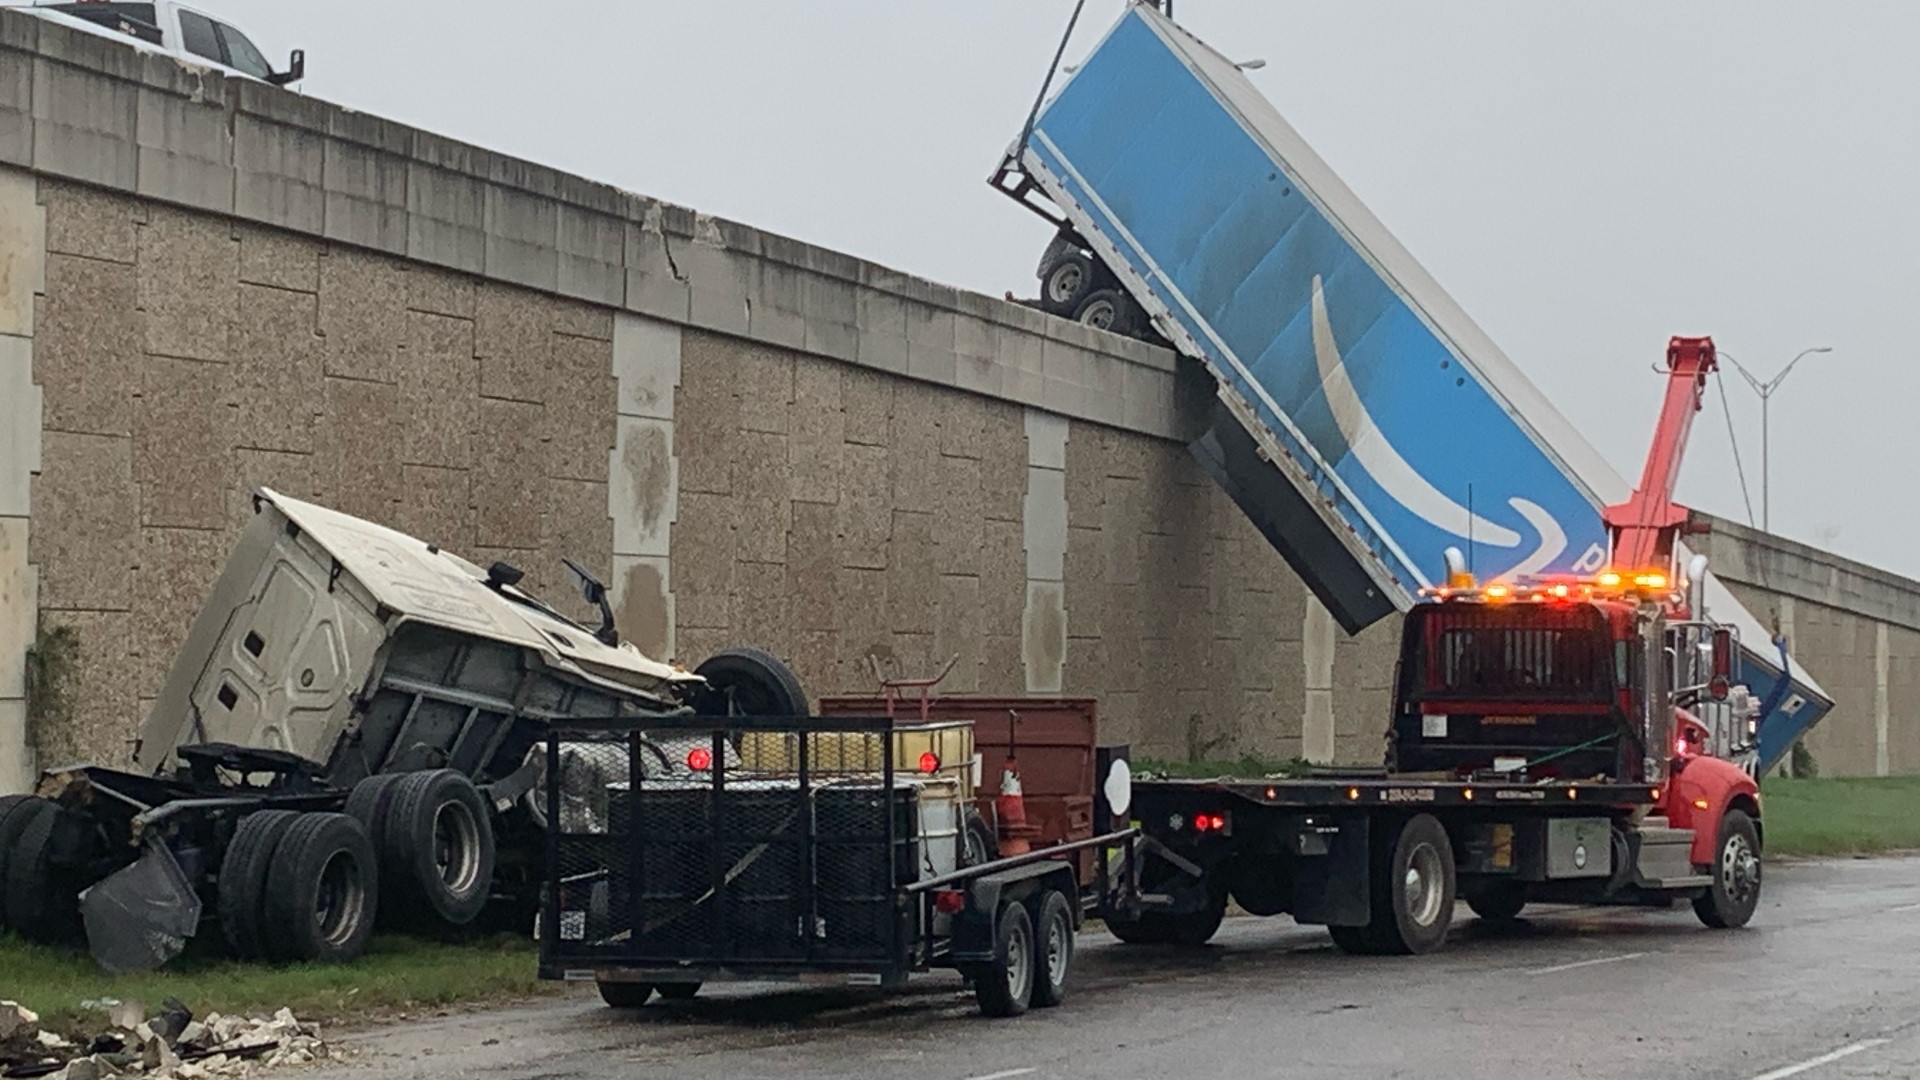 Authorities said the trailer was empty at the time of the crash.